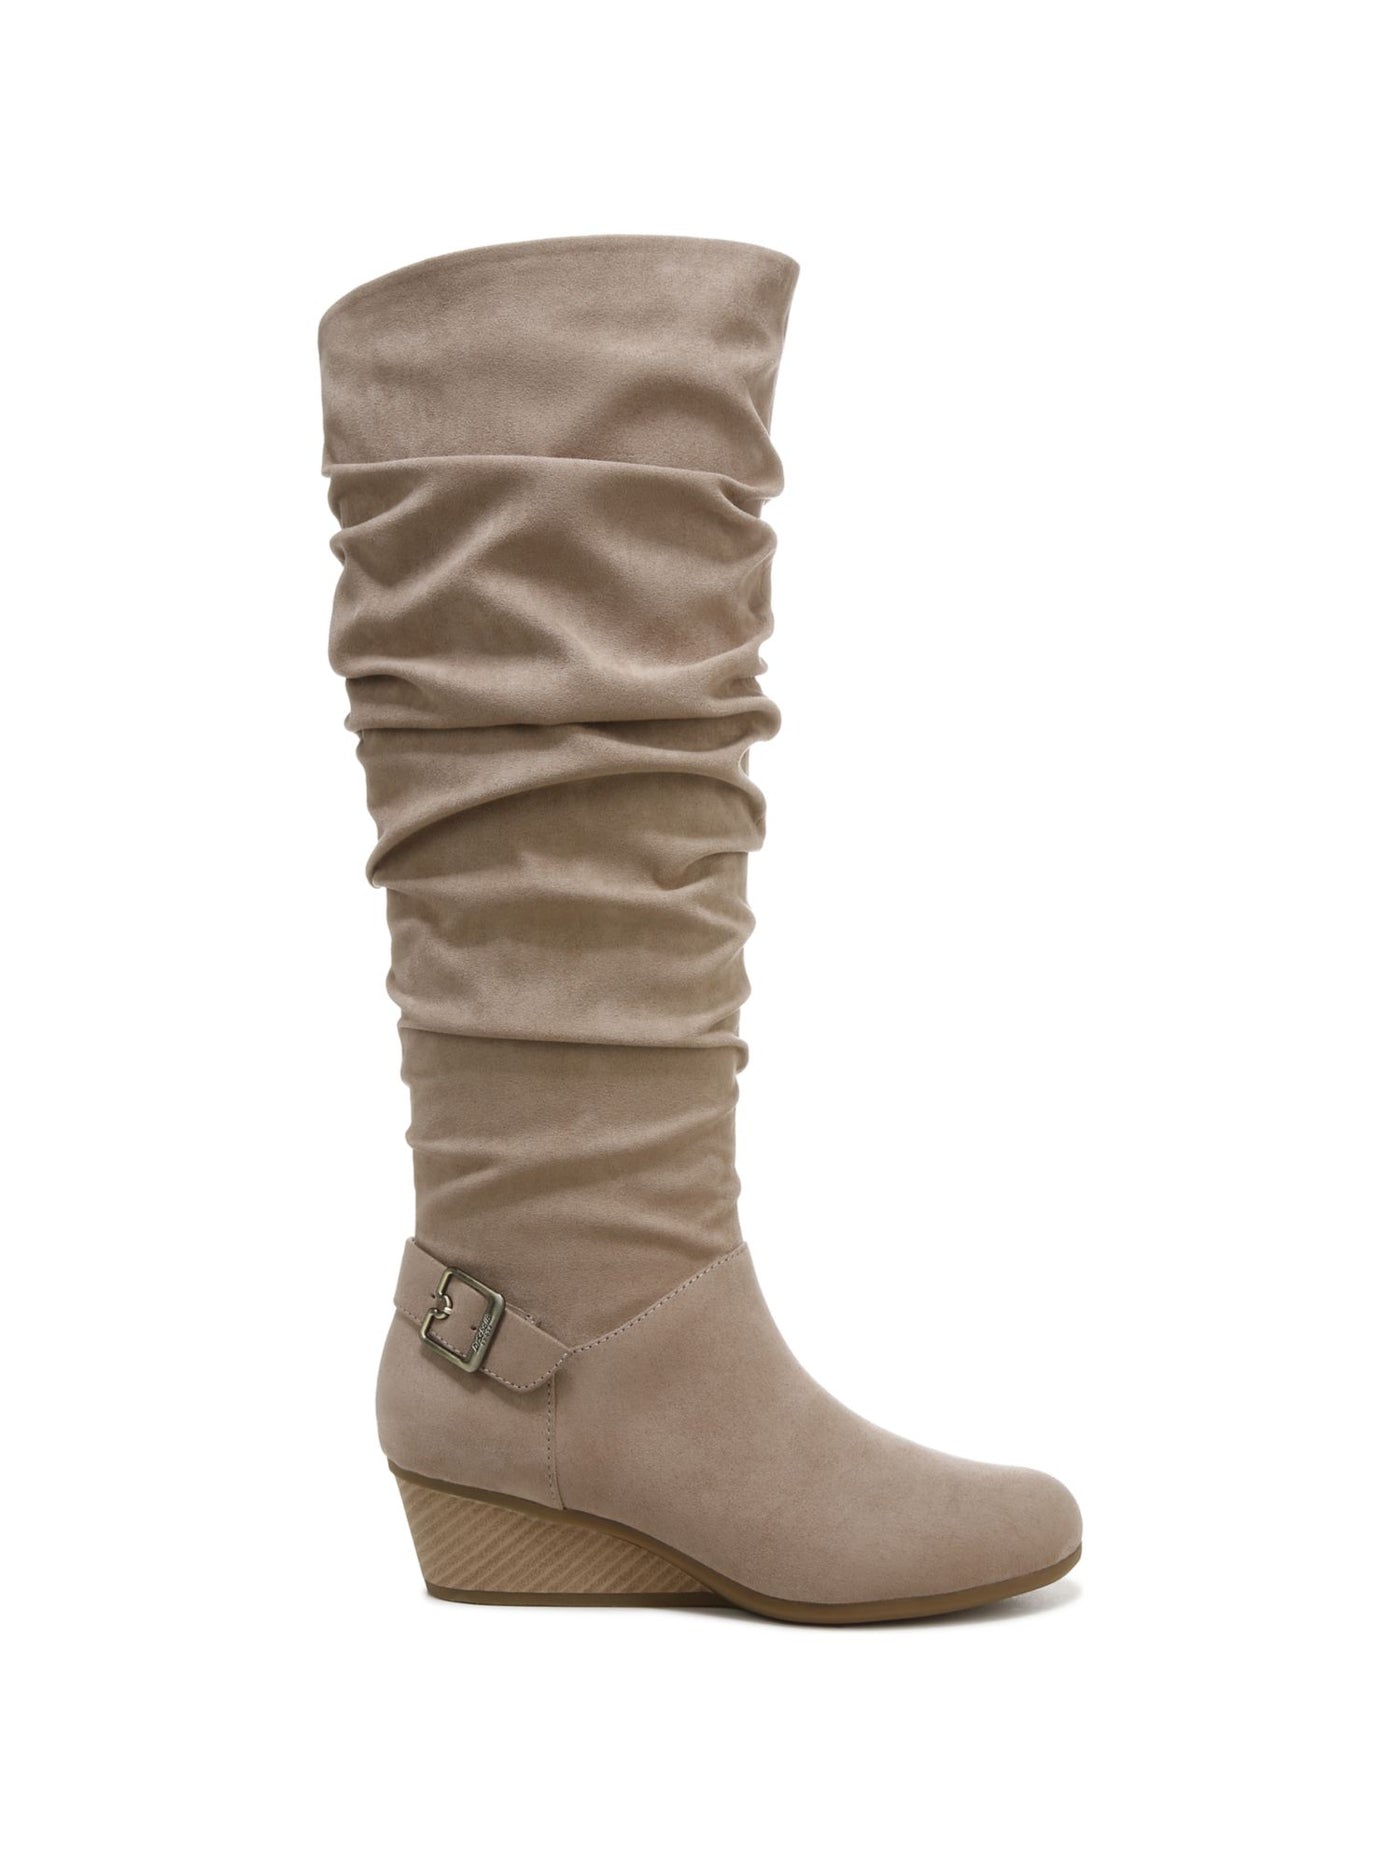 DR SCHOLLS Womens Beige Goring Padded Buckle Accent Ruched Break Free Round Toe Wedge Zip-Up Dress Slouch Boot 9 M